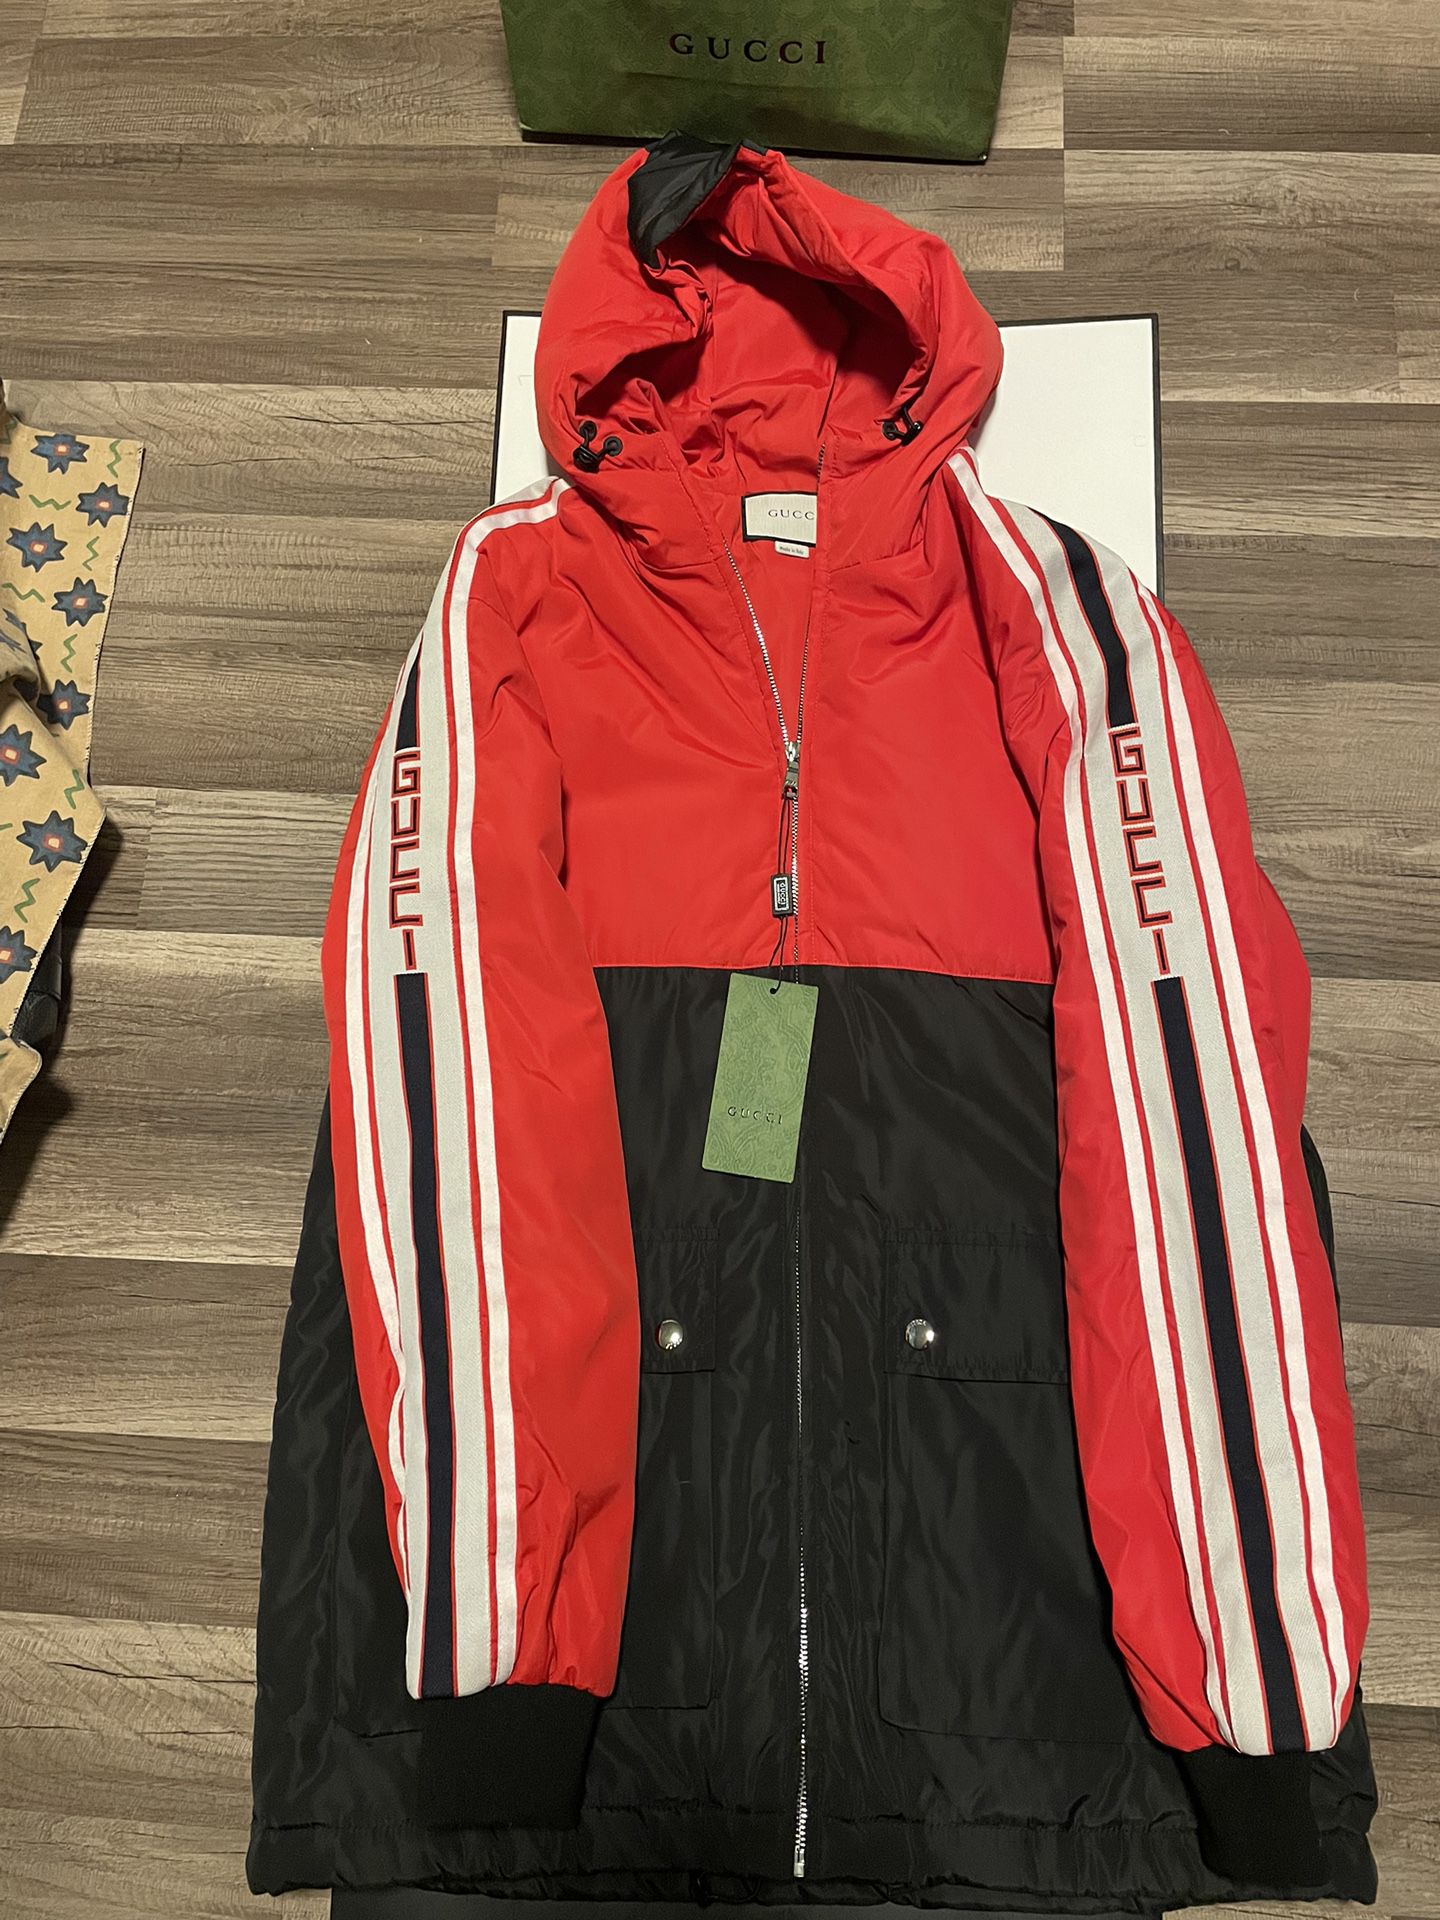 Gg Red Jacket 